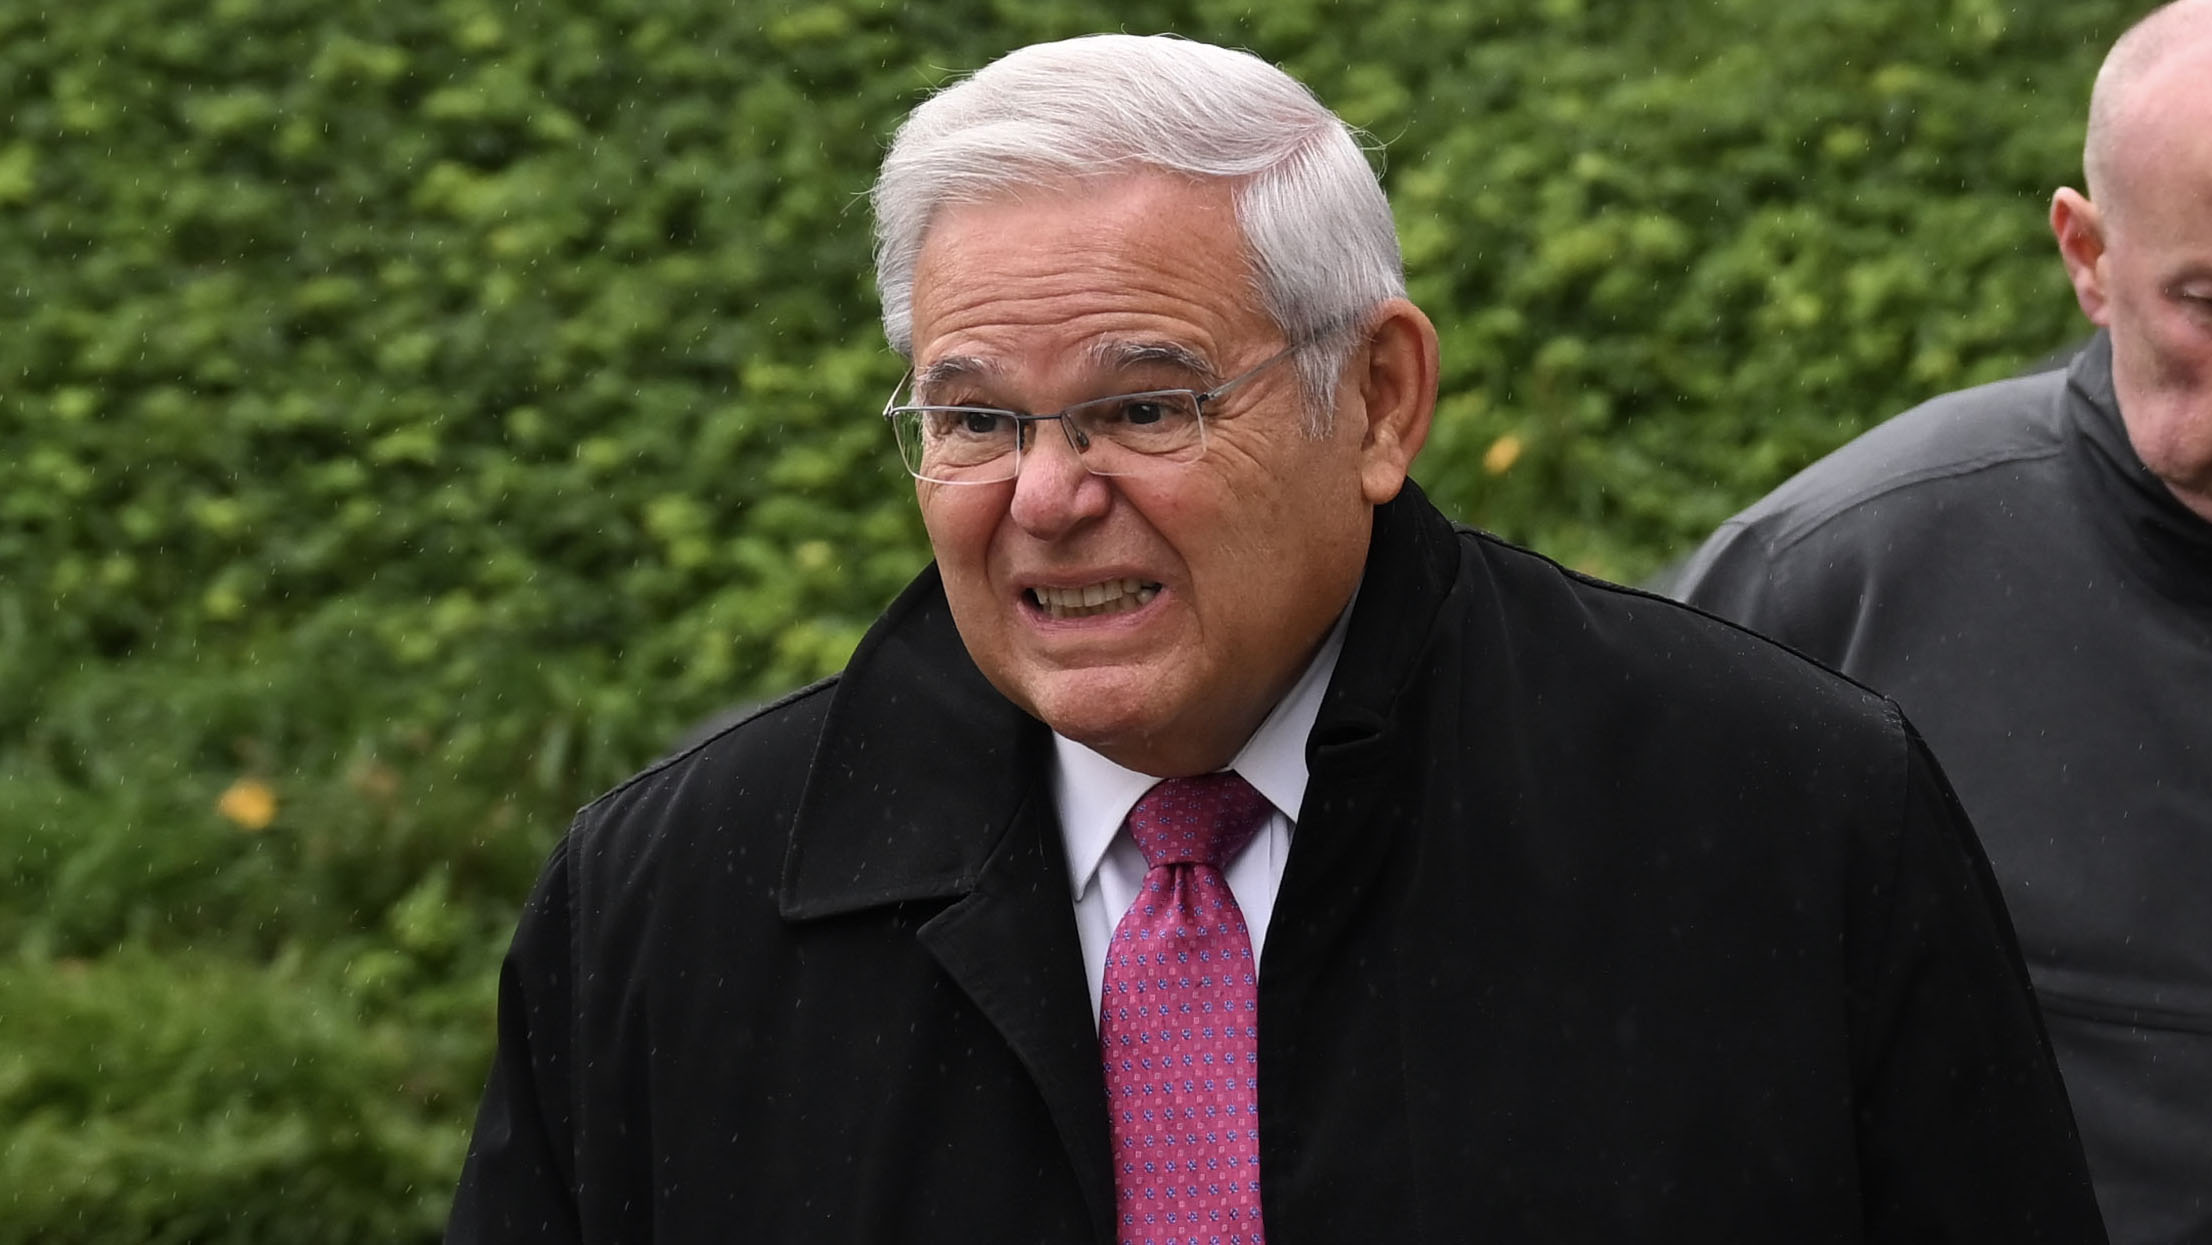 Reports indicate that Democratic Senator Menendez is considering shifting blame for alleged crimes to his wife